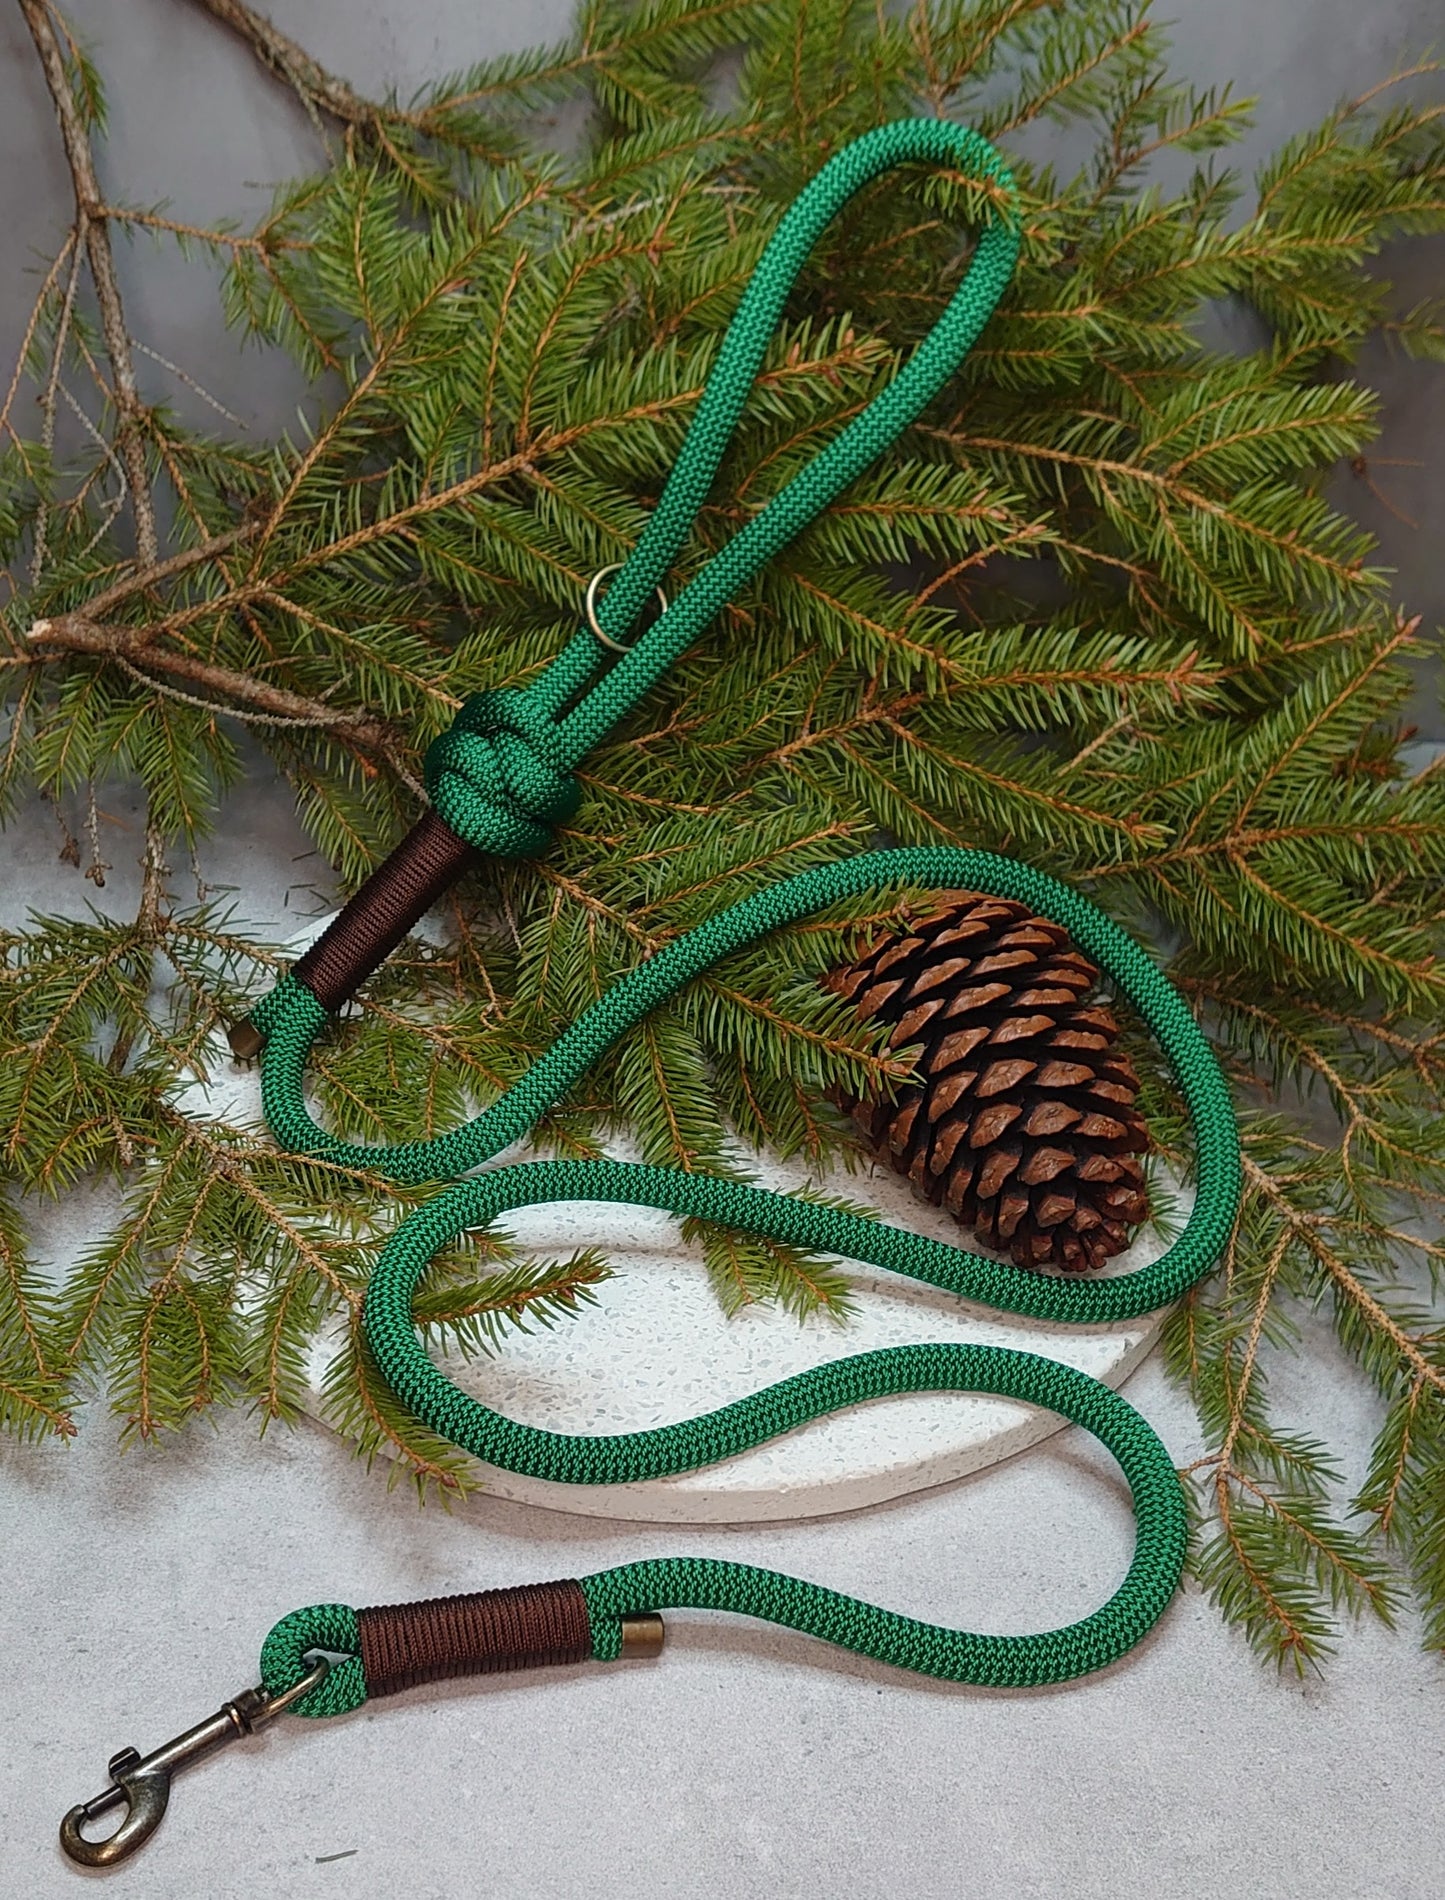 Woodle Octoknot rope lead - Design your own